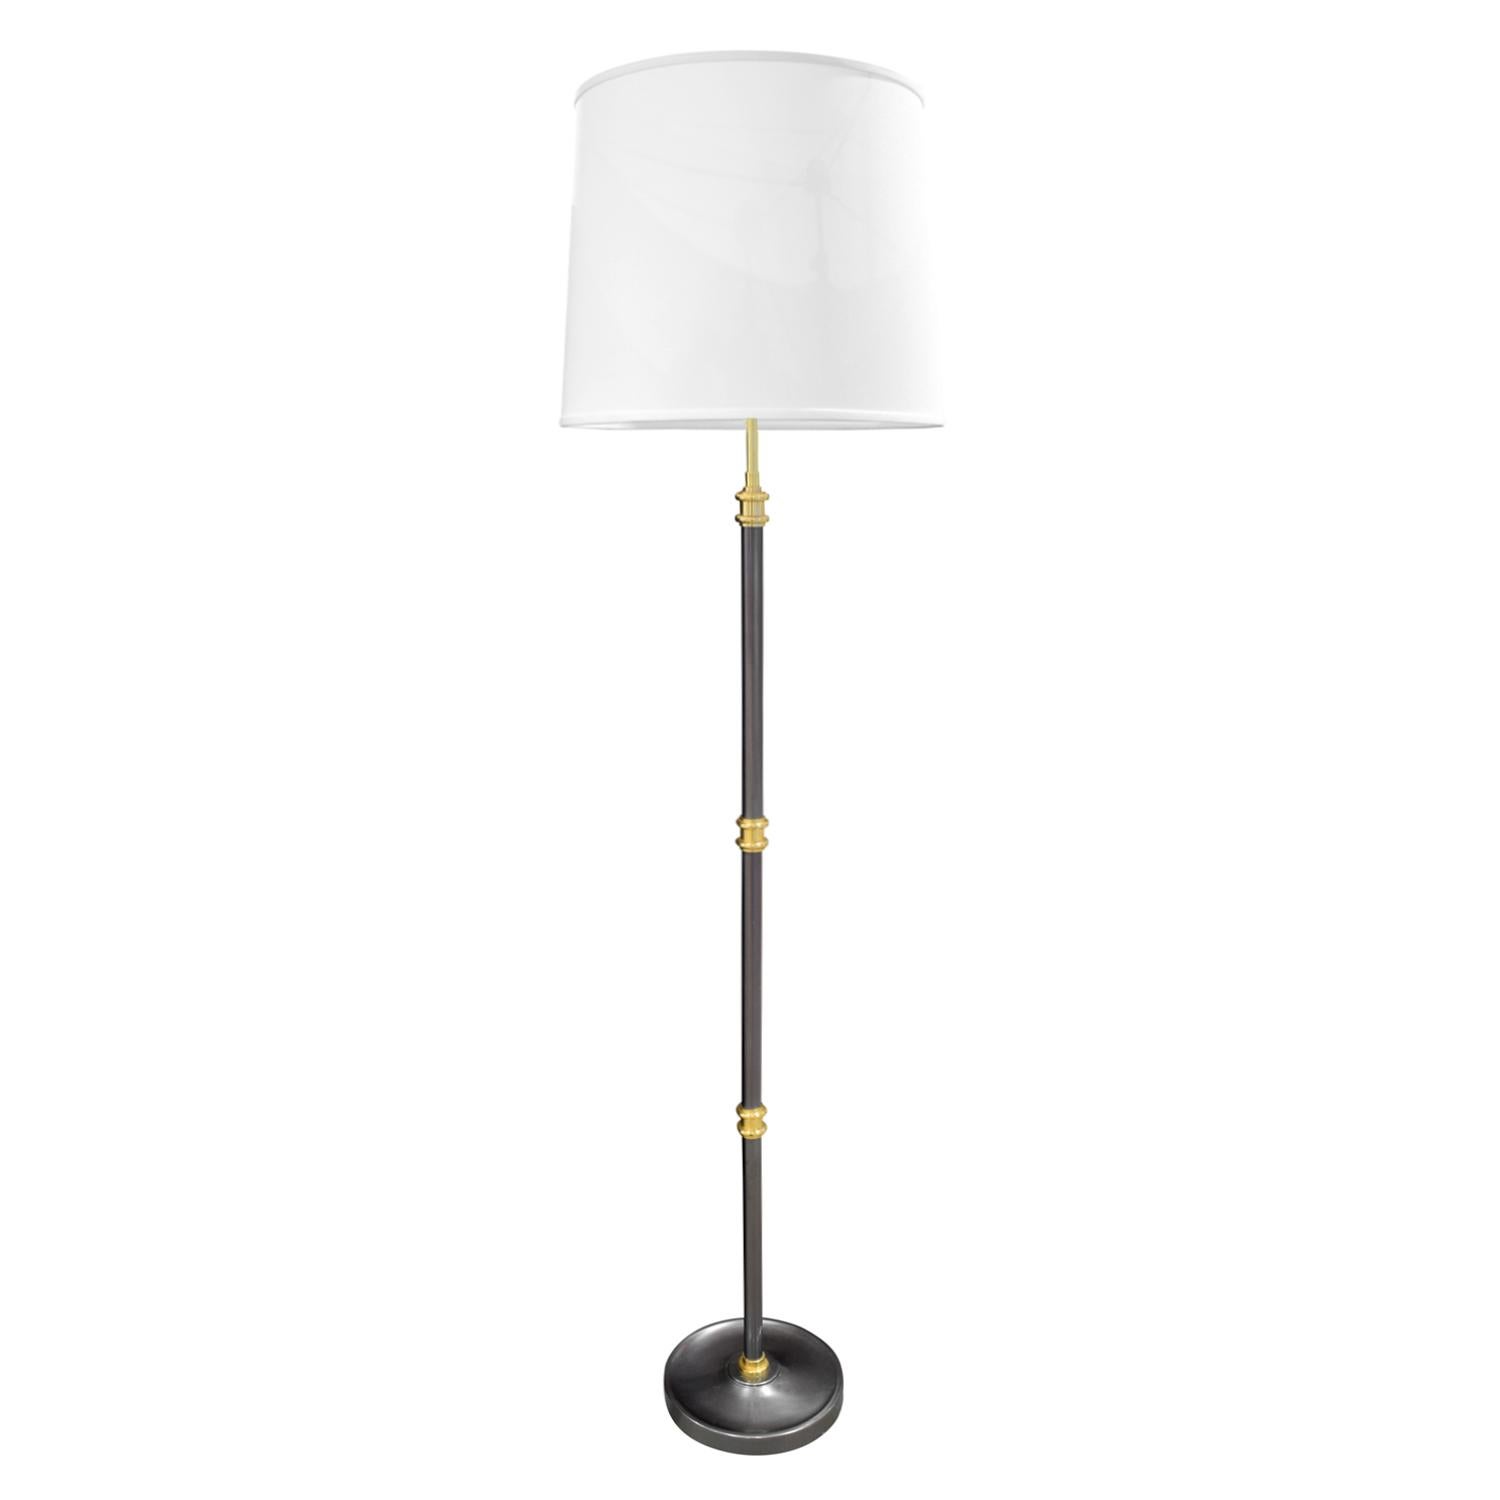 Elegant floor lamp in gunmetal with polished brass accents and ball feet, American, 1980s. This lamp is beautifully made. It has been rewired with new sockets. Height is adjustable.

Measures: Shade diameter 16 inches
Shade height 13 inches.